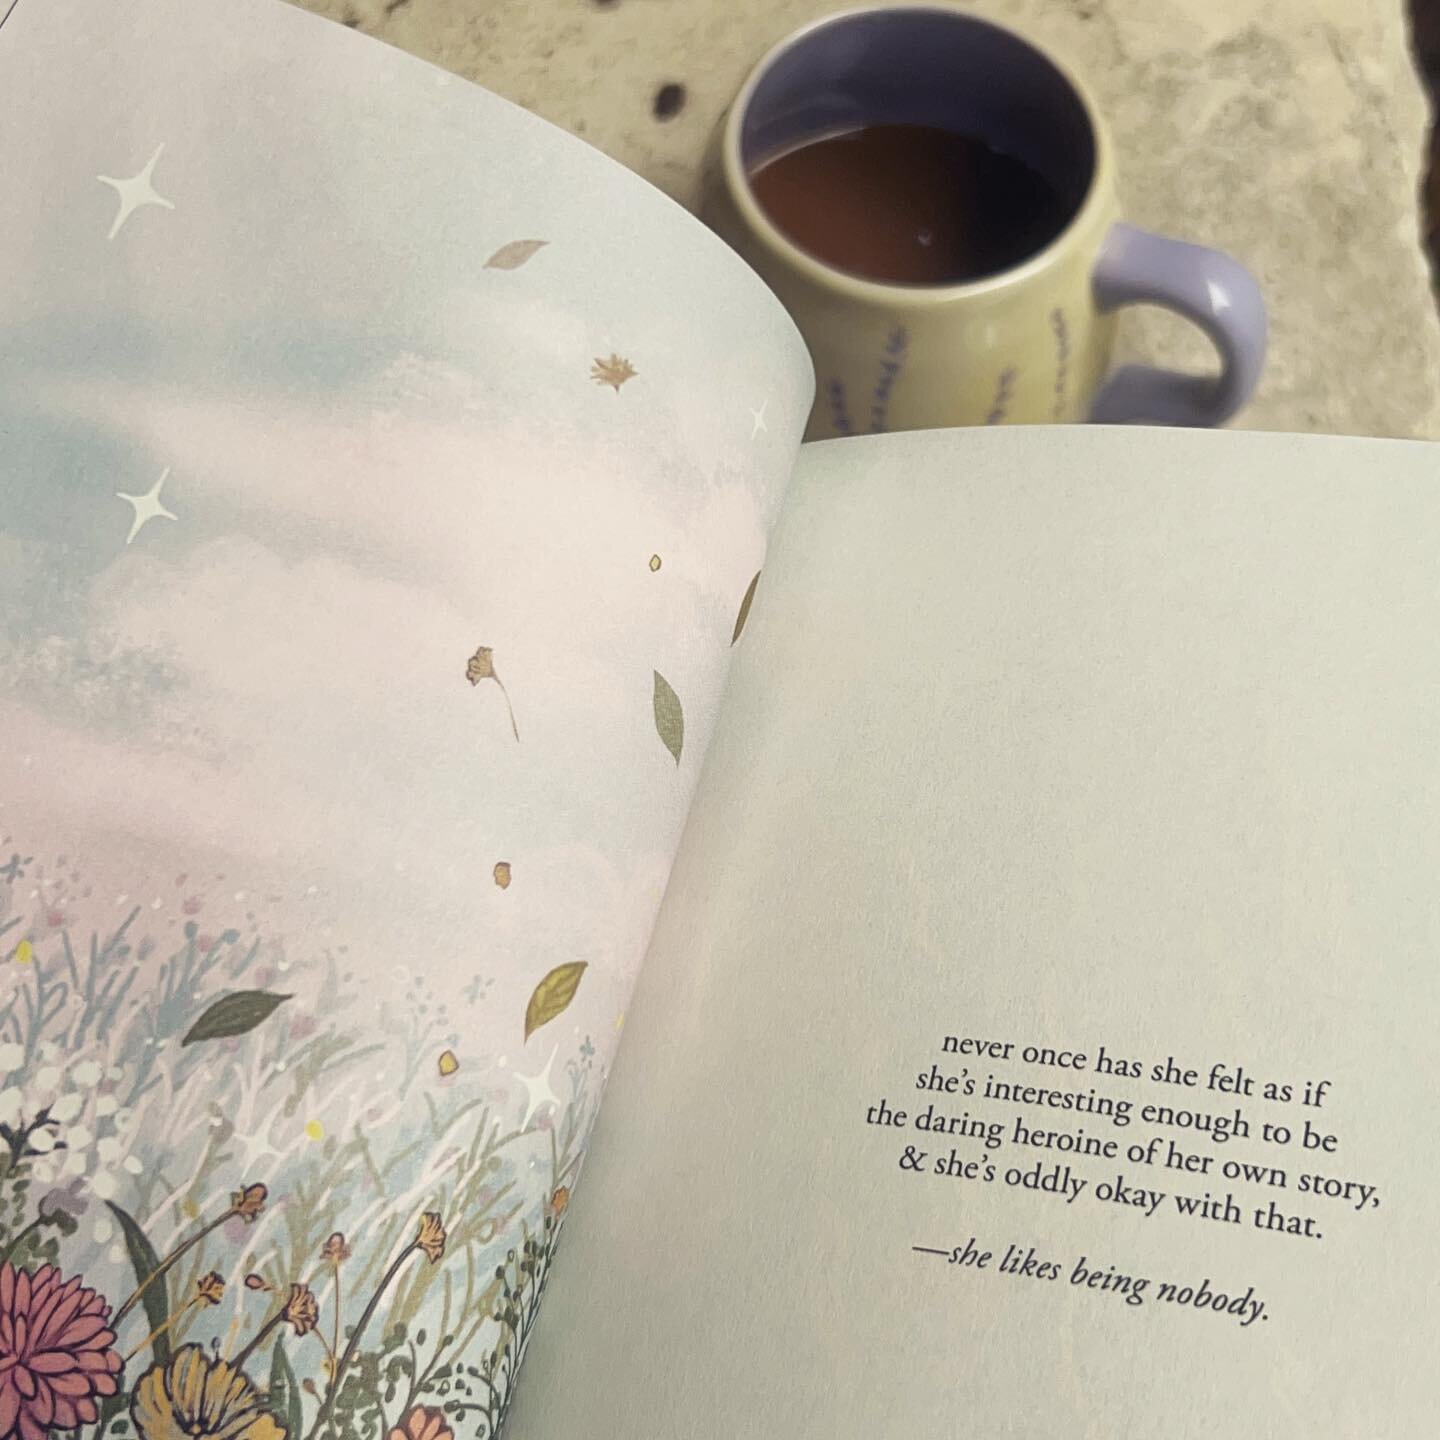 Morning coffee and poetry. ☕️📖🌸